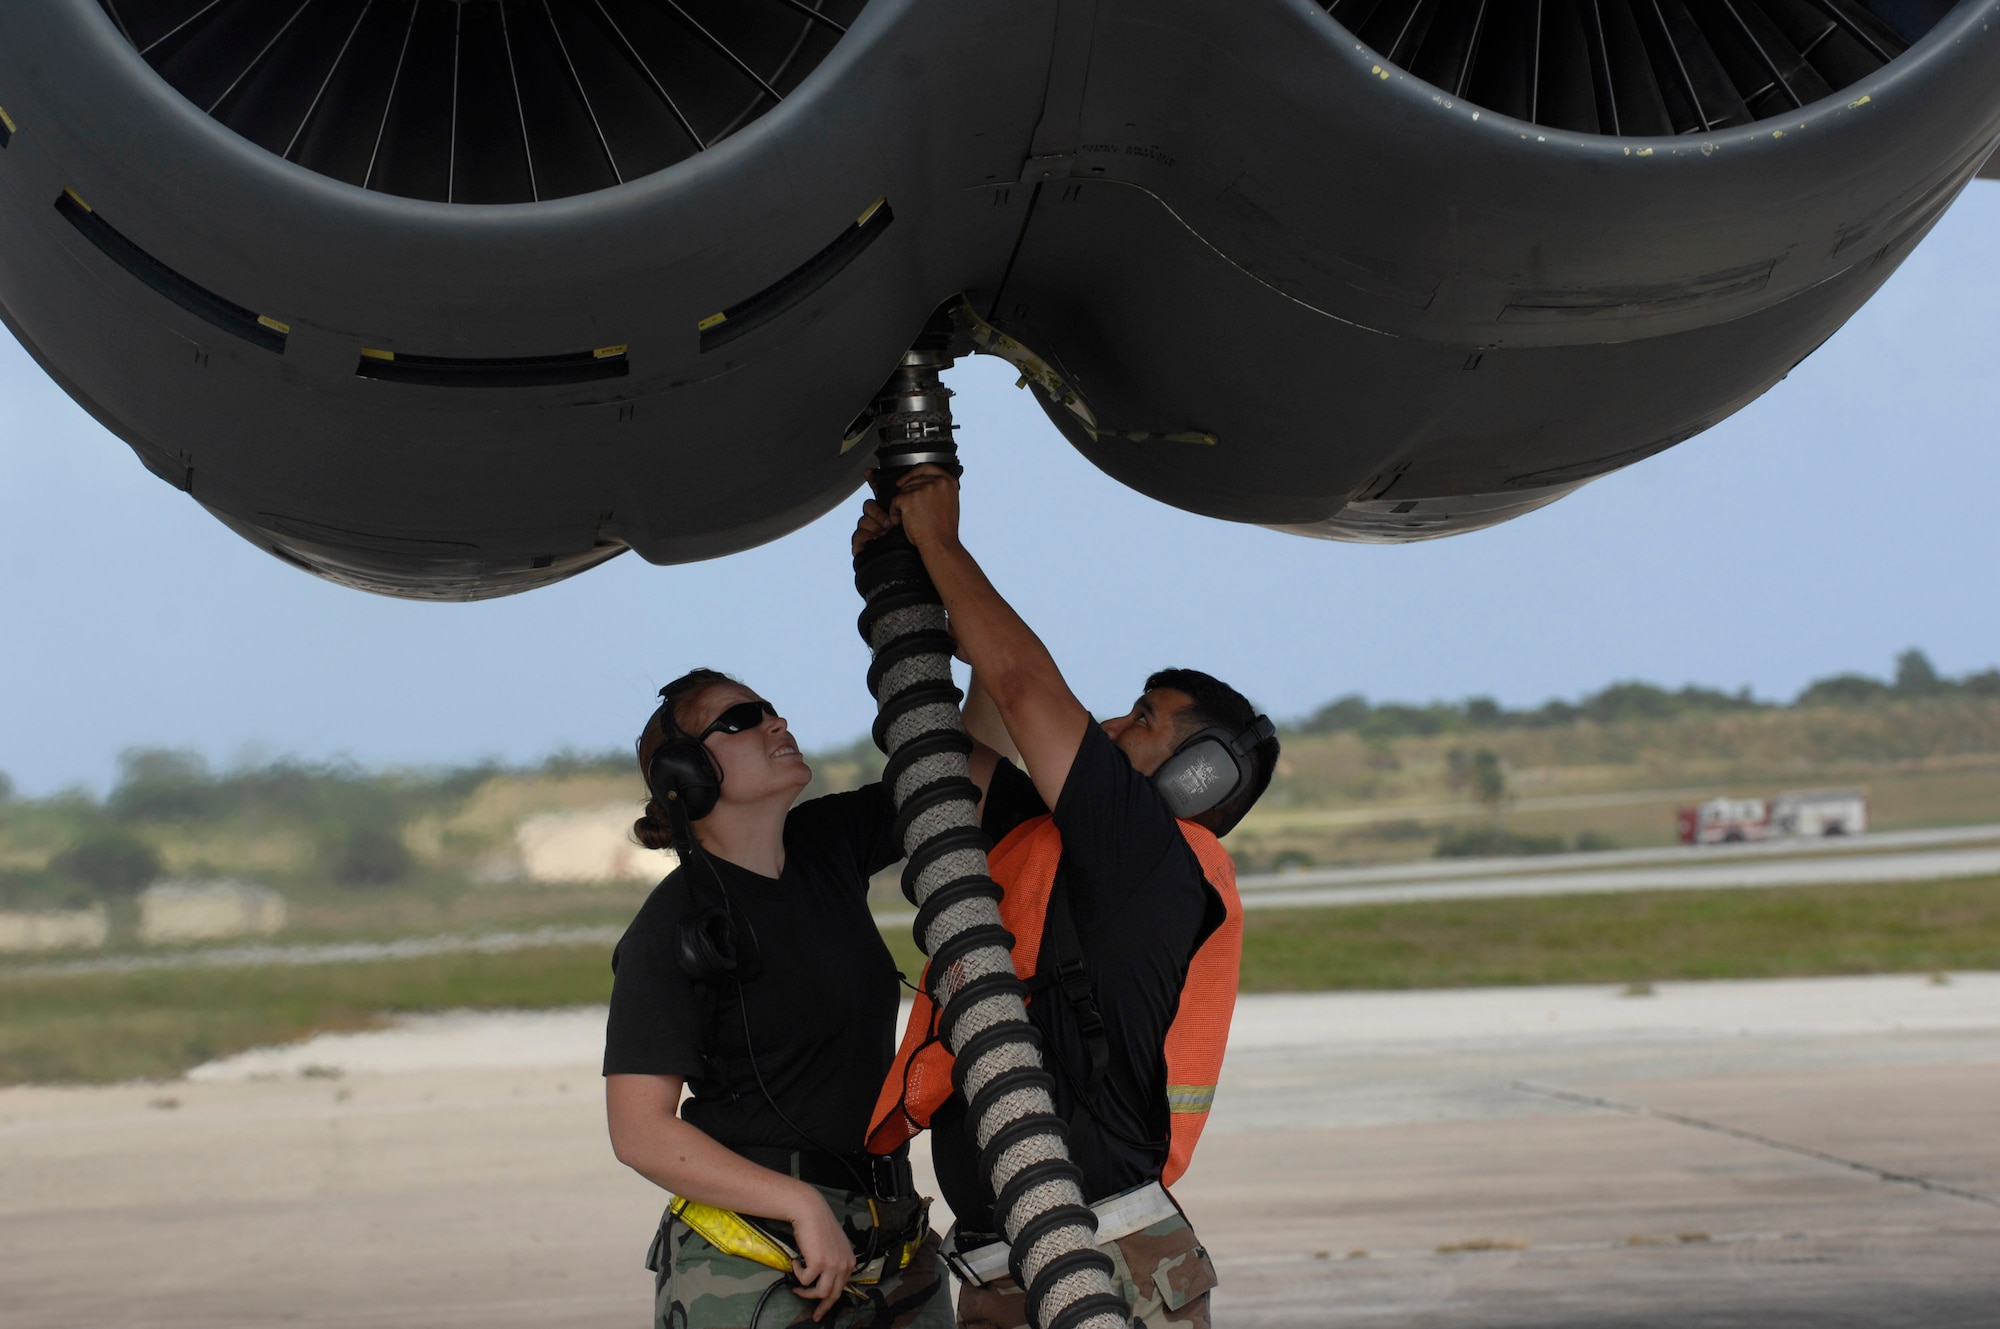 Airman 1st Class Caroline Kraus and Tech. Sgt. Carlos Sanchez remove the air cart hose after starting engines Dec. 30, during a B-52 Stratofortress launch at Andersen Air Force Base, Guam. Both are assigned to the 36th Expeditionary Aircraft Maintenance Squadron at Andersen and are deployed from Minot AFB, N.D. The bomber's participation in constant training helps emphasize the U.S. bomber presence, demonstrating U.S. commitment to the Pacific region. (U.S. Air Force photo/Master Sgt. Kevin J. Gruenwald)